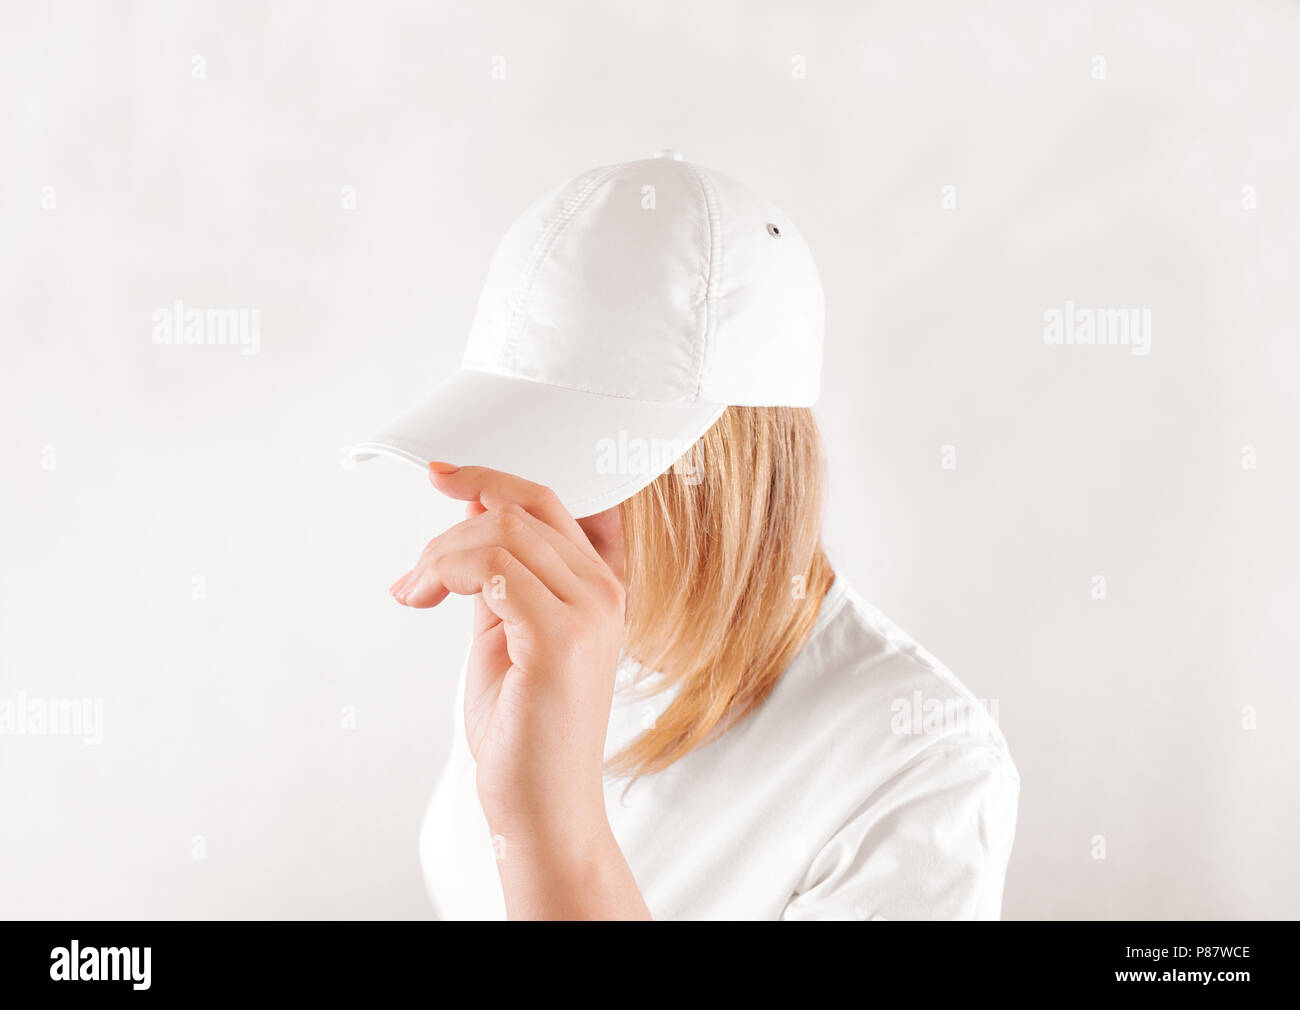 Blank white baseball cap mockup template, wear on women head, isolated, side view. Woman in clear hat and t shirt uniform mock up holding visor of cap Stock Photo